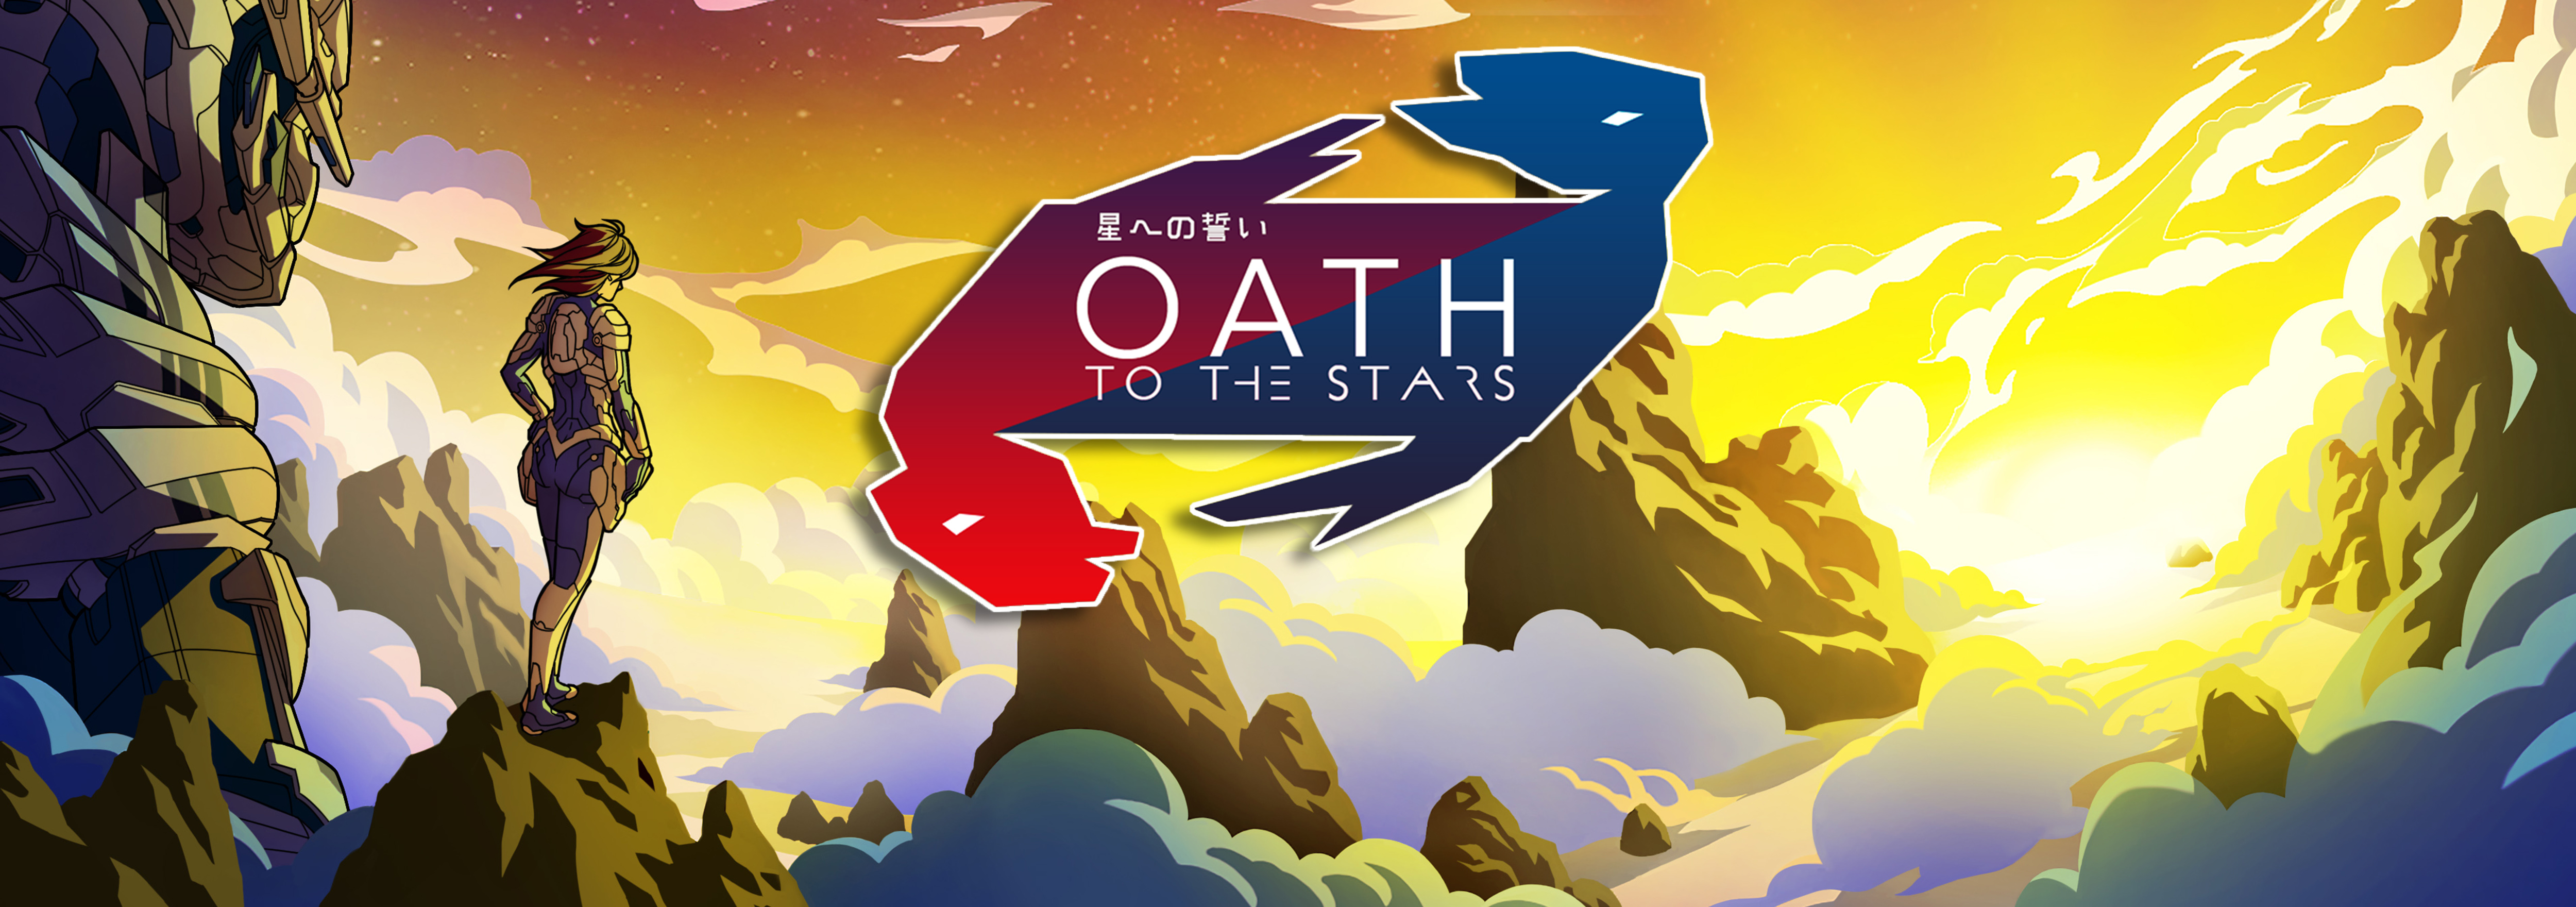 An Oath to the Stars